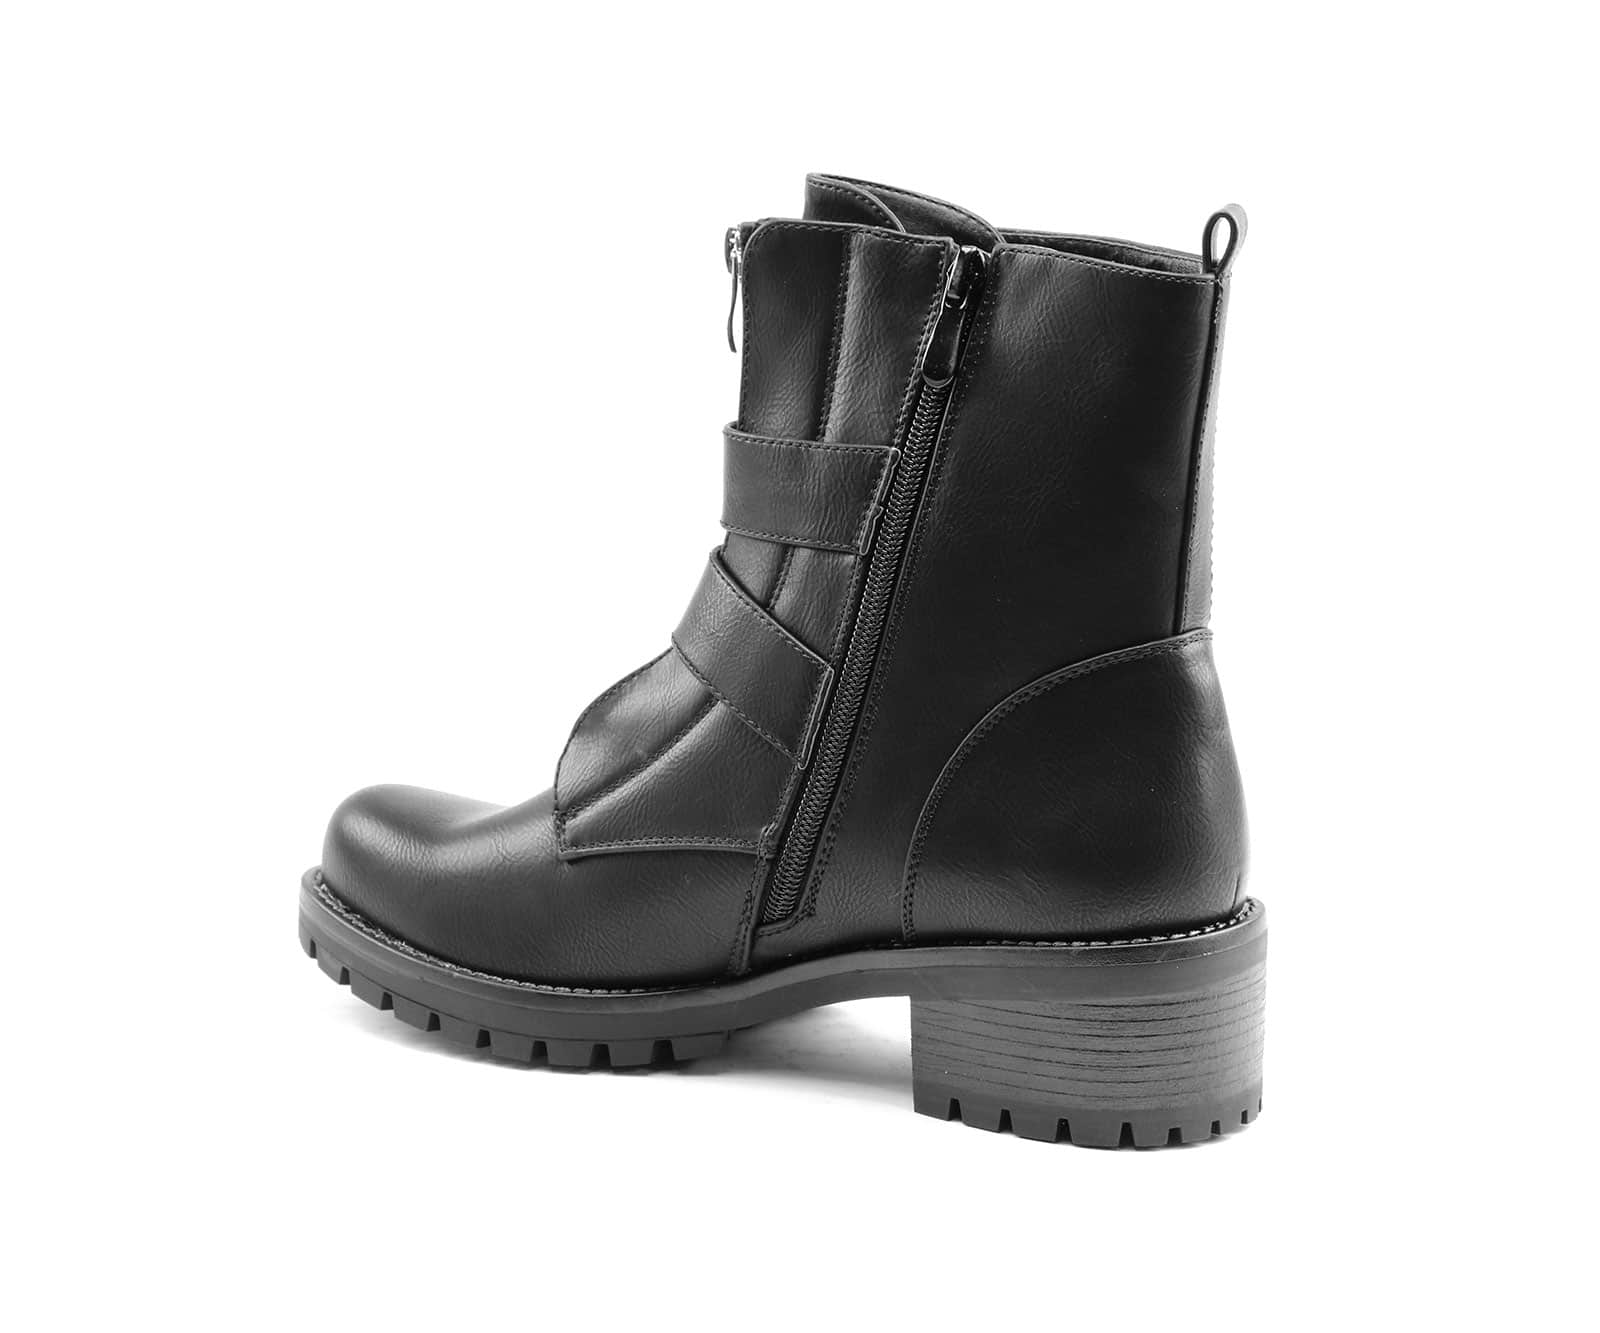 Double Buckle Boots Black